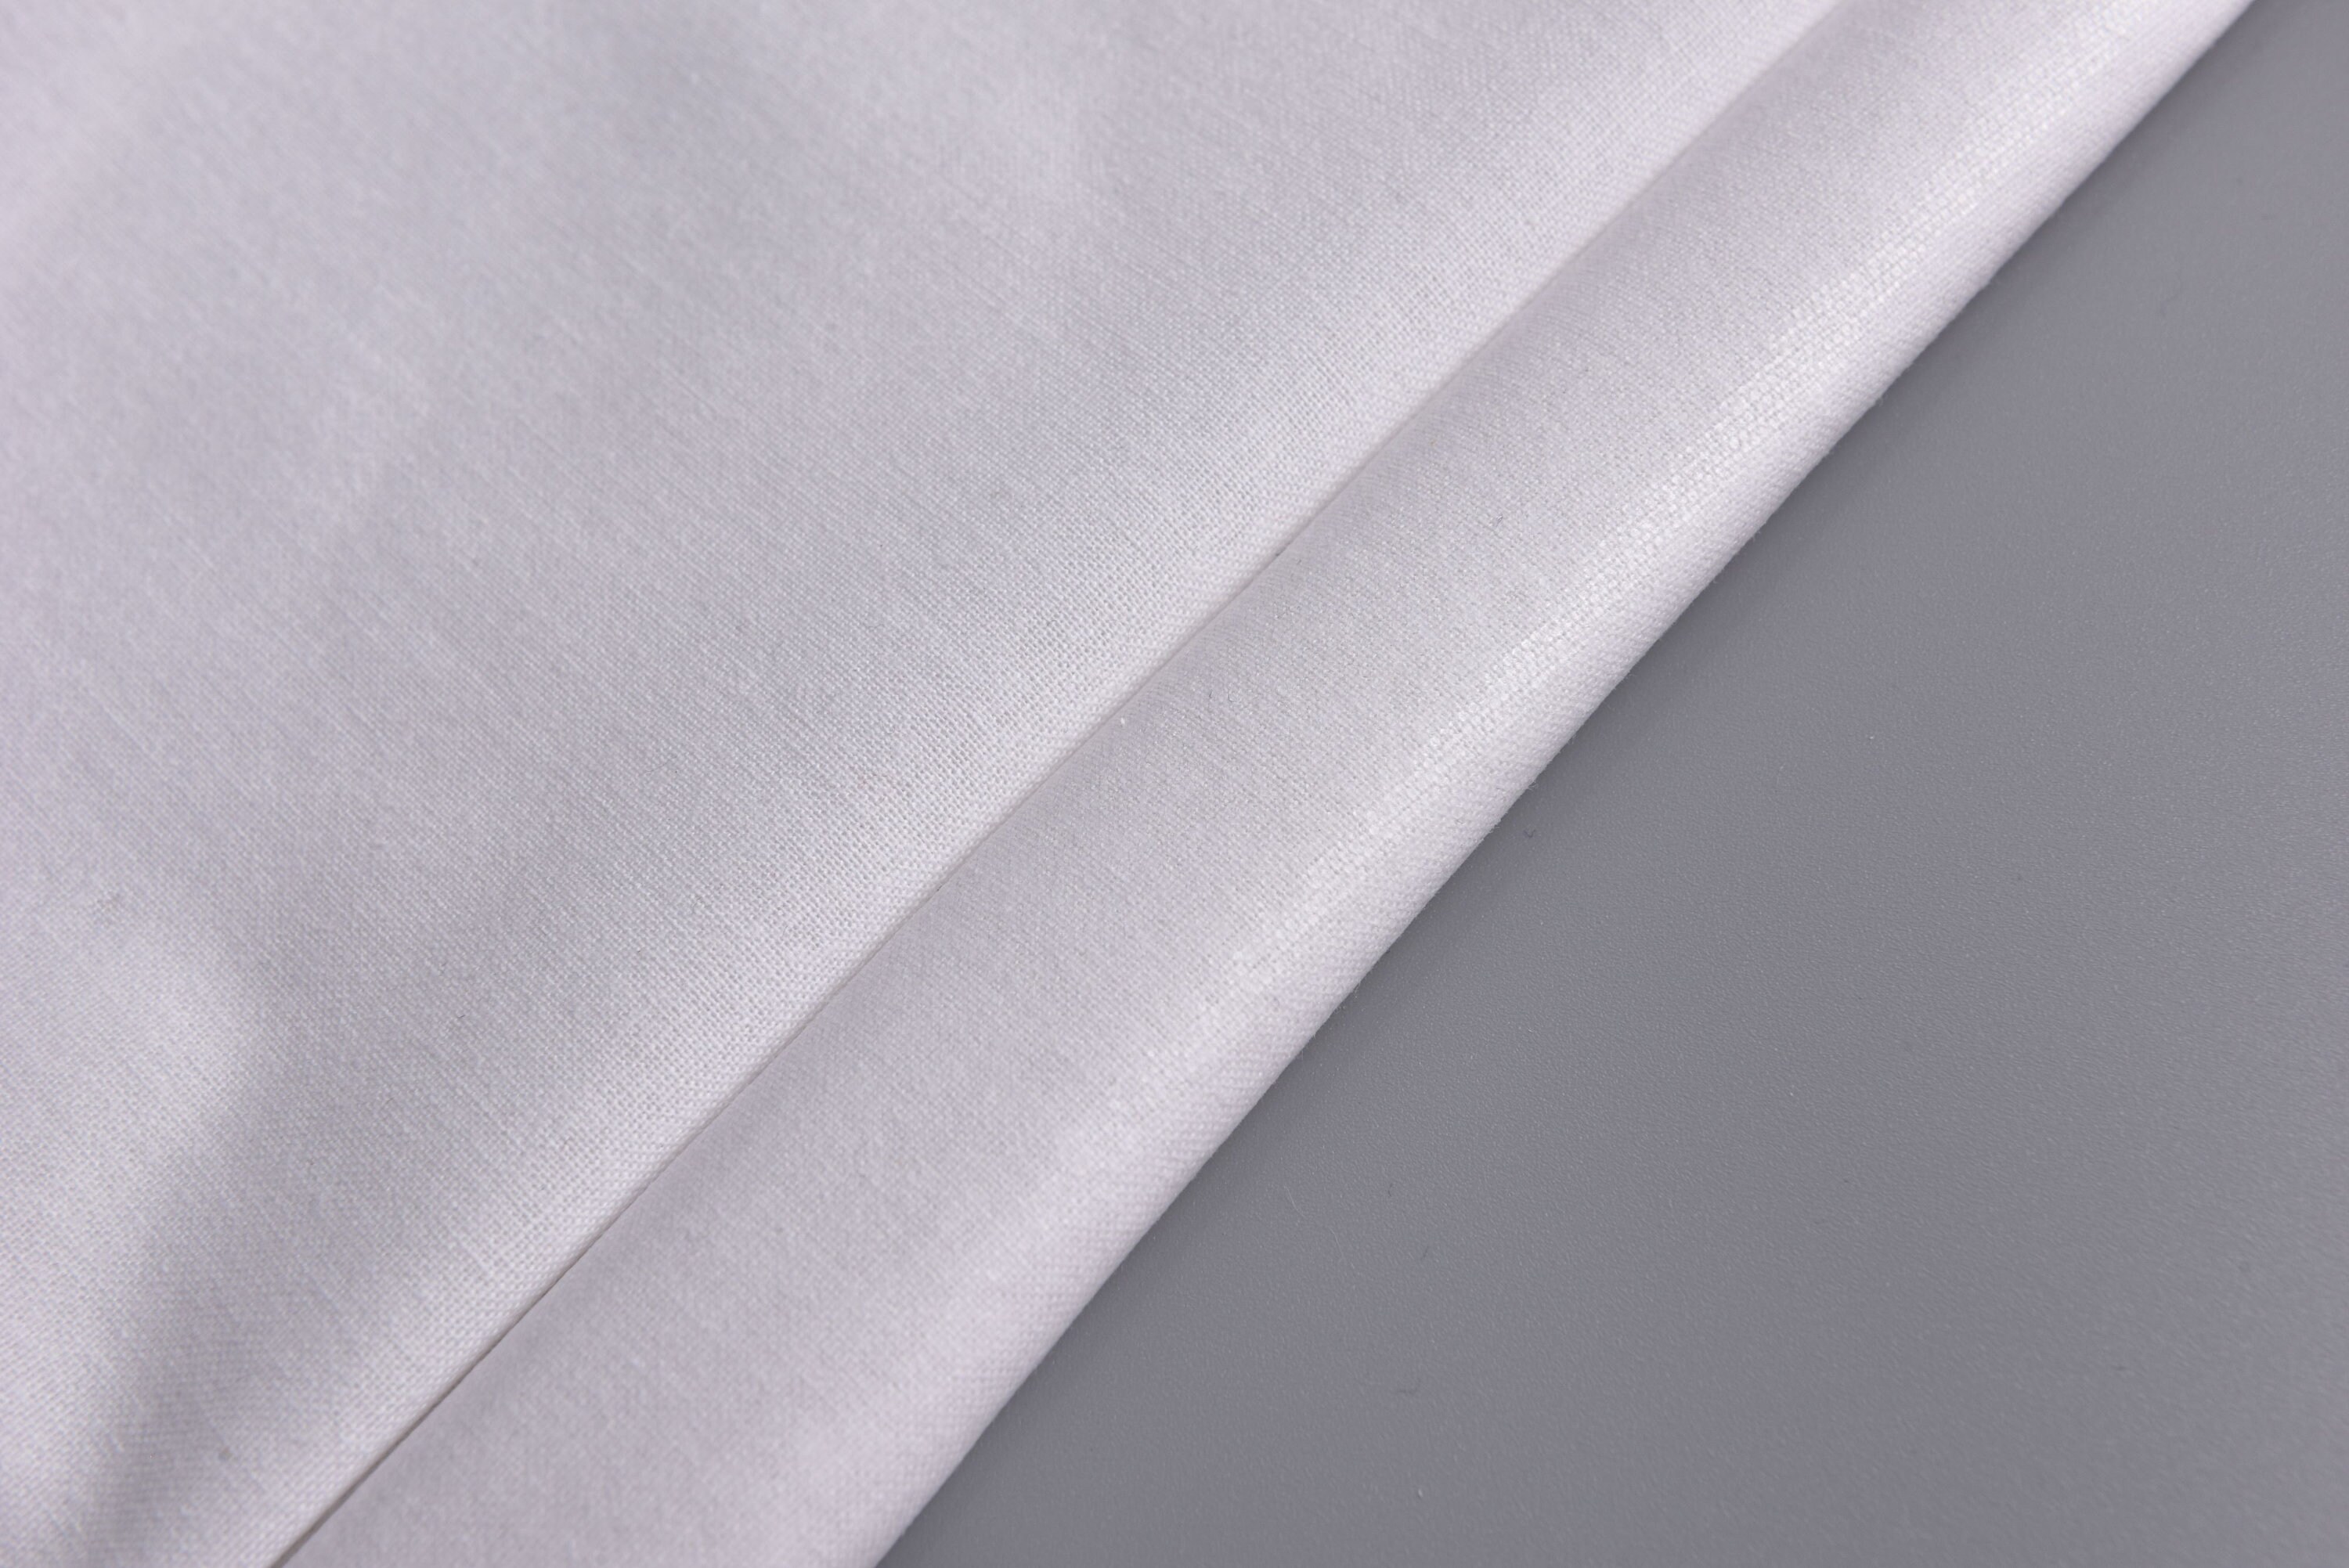 Iron on Fusible Interfacing BLACK HEAVY WEIGHT Fabric 100cm Wide per Metre  